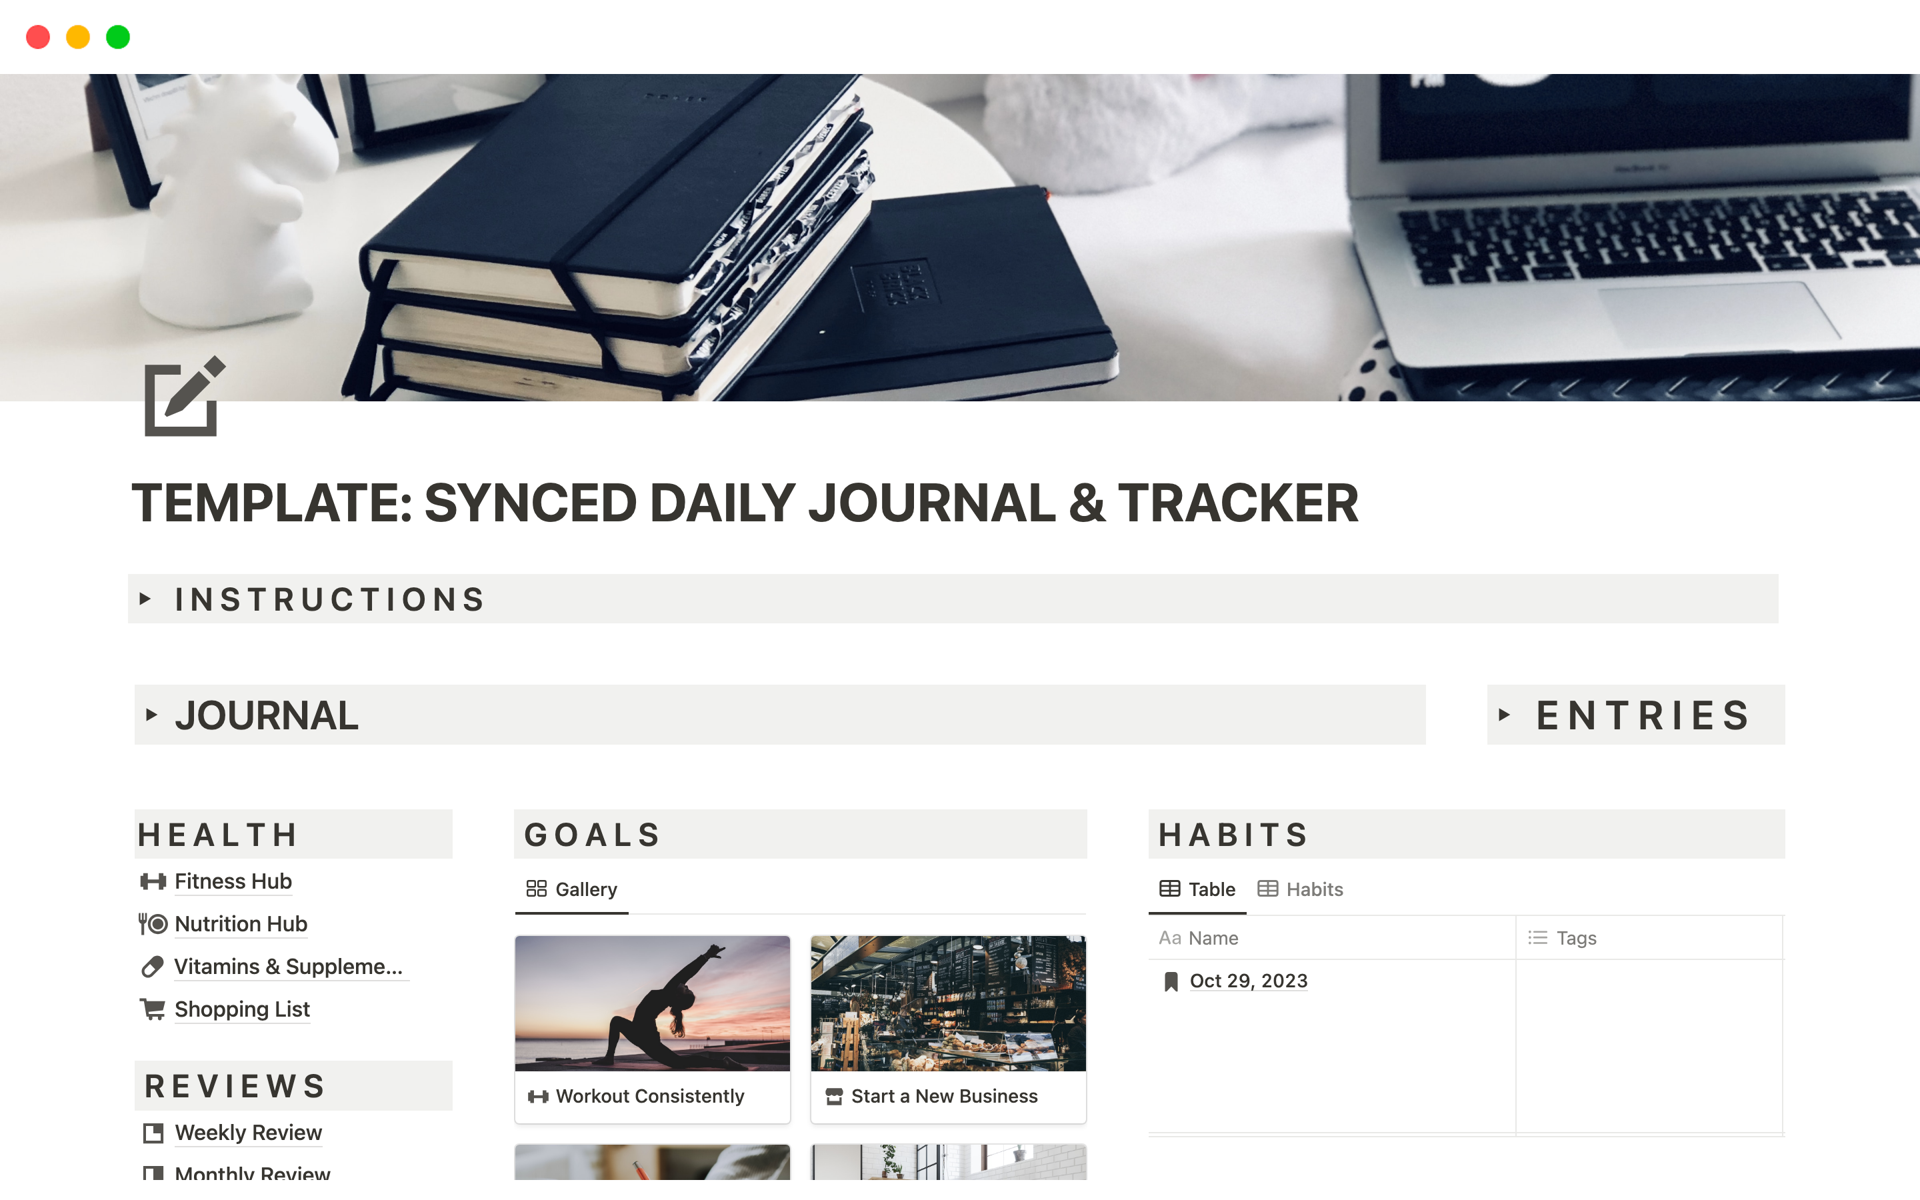 One single input (a daily journal) that is meticulously designed to provide multiple outputs, to make it easy to track habits, nutrition, fitness, and goals. 